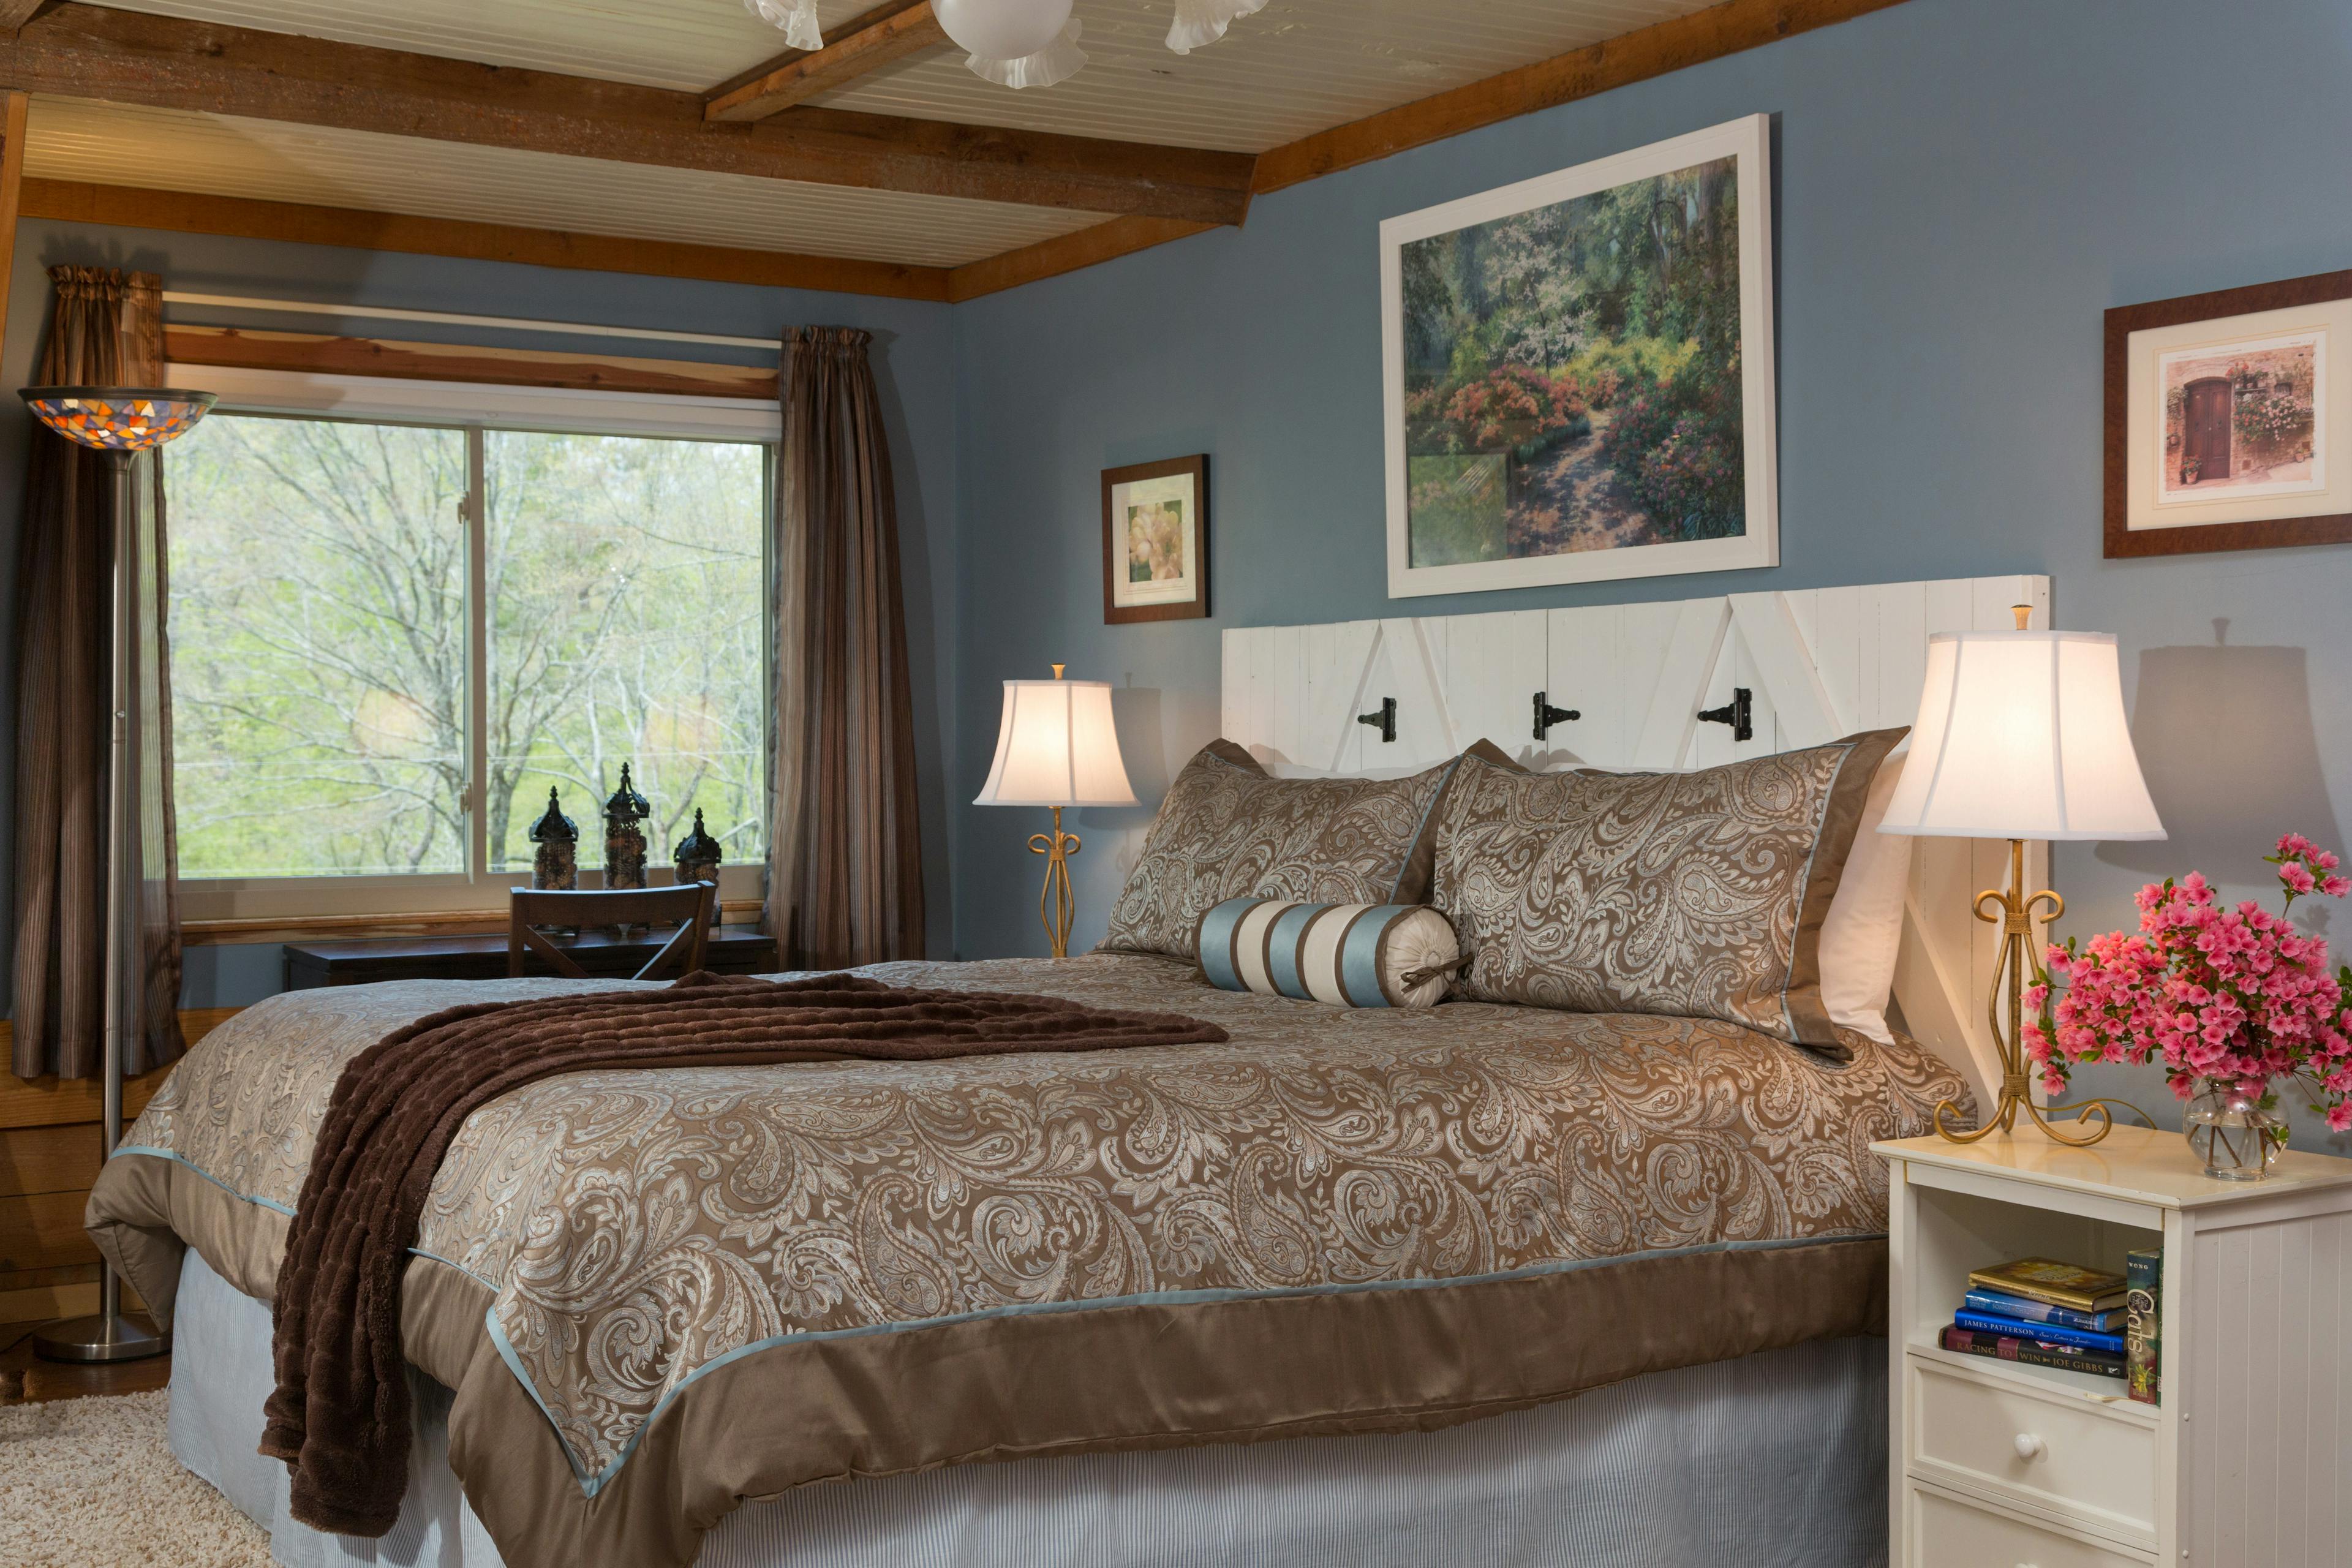 king-sized bed with 2 large and one small accent pillows, a brown throw blanket, and a brown & blue duvet cover.  To the right of the bed is a white nightstand wtih books on the shelf, and a table lamp and pink flowers on top.  To the left of the bed is a matching lamp, and a small desk in front of a large window.